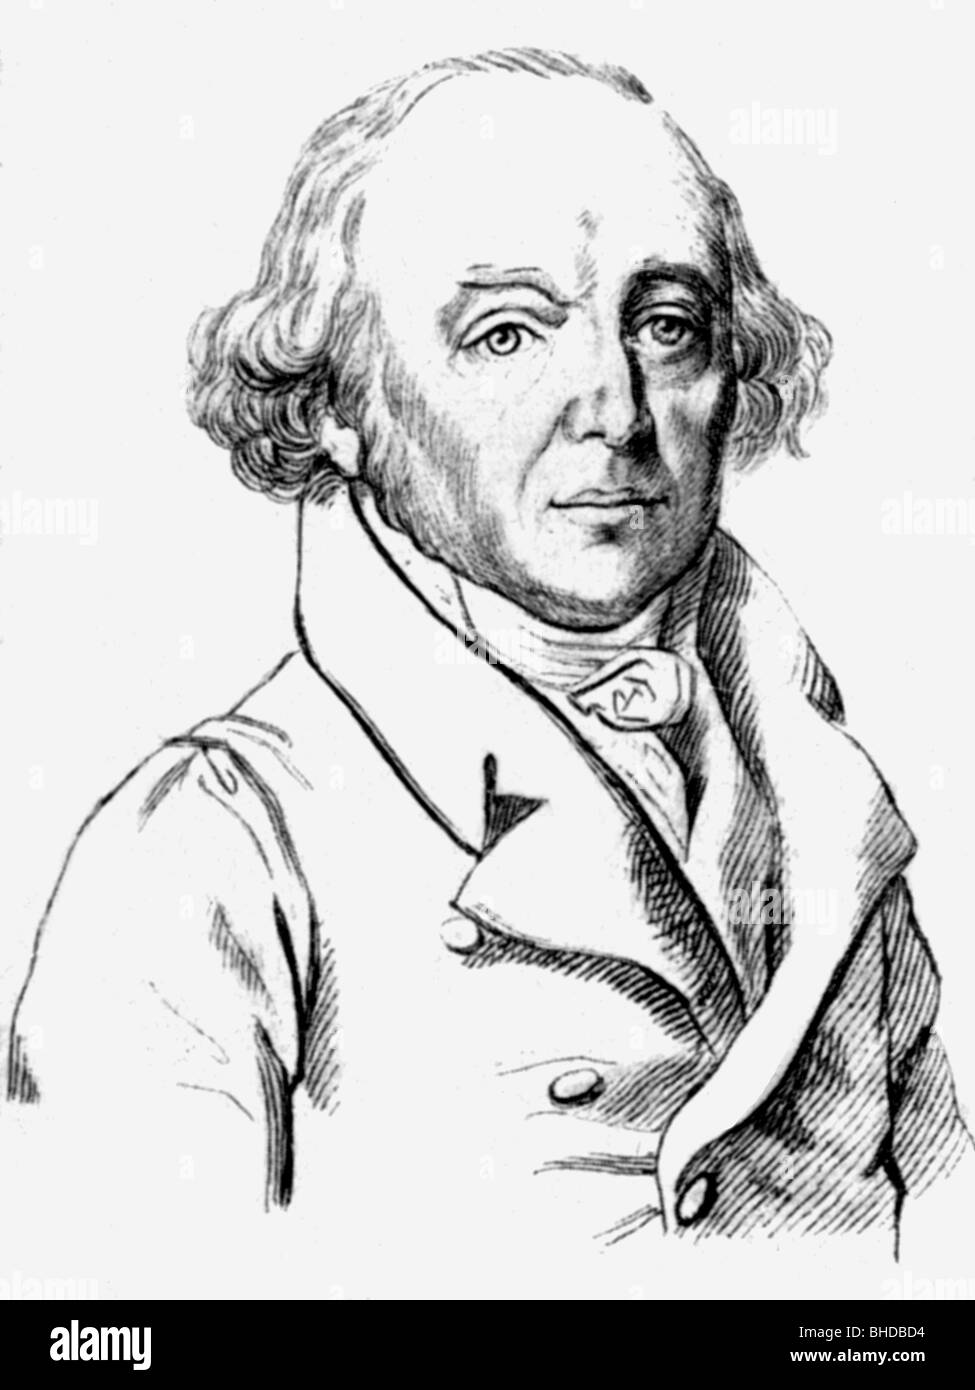 Hahnemann, Christian Friedrich Samuel, 10.4.1755 - 2.7.1843, German physician, founder of homoeopathy, portrait, after etching by Mayer, , Stock Photo